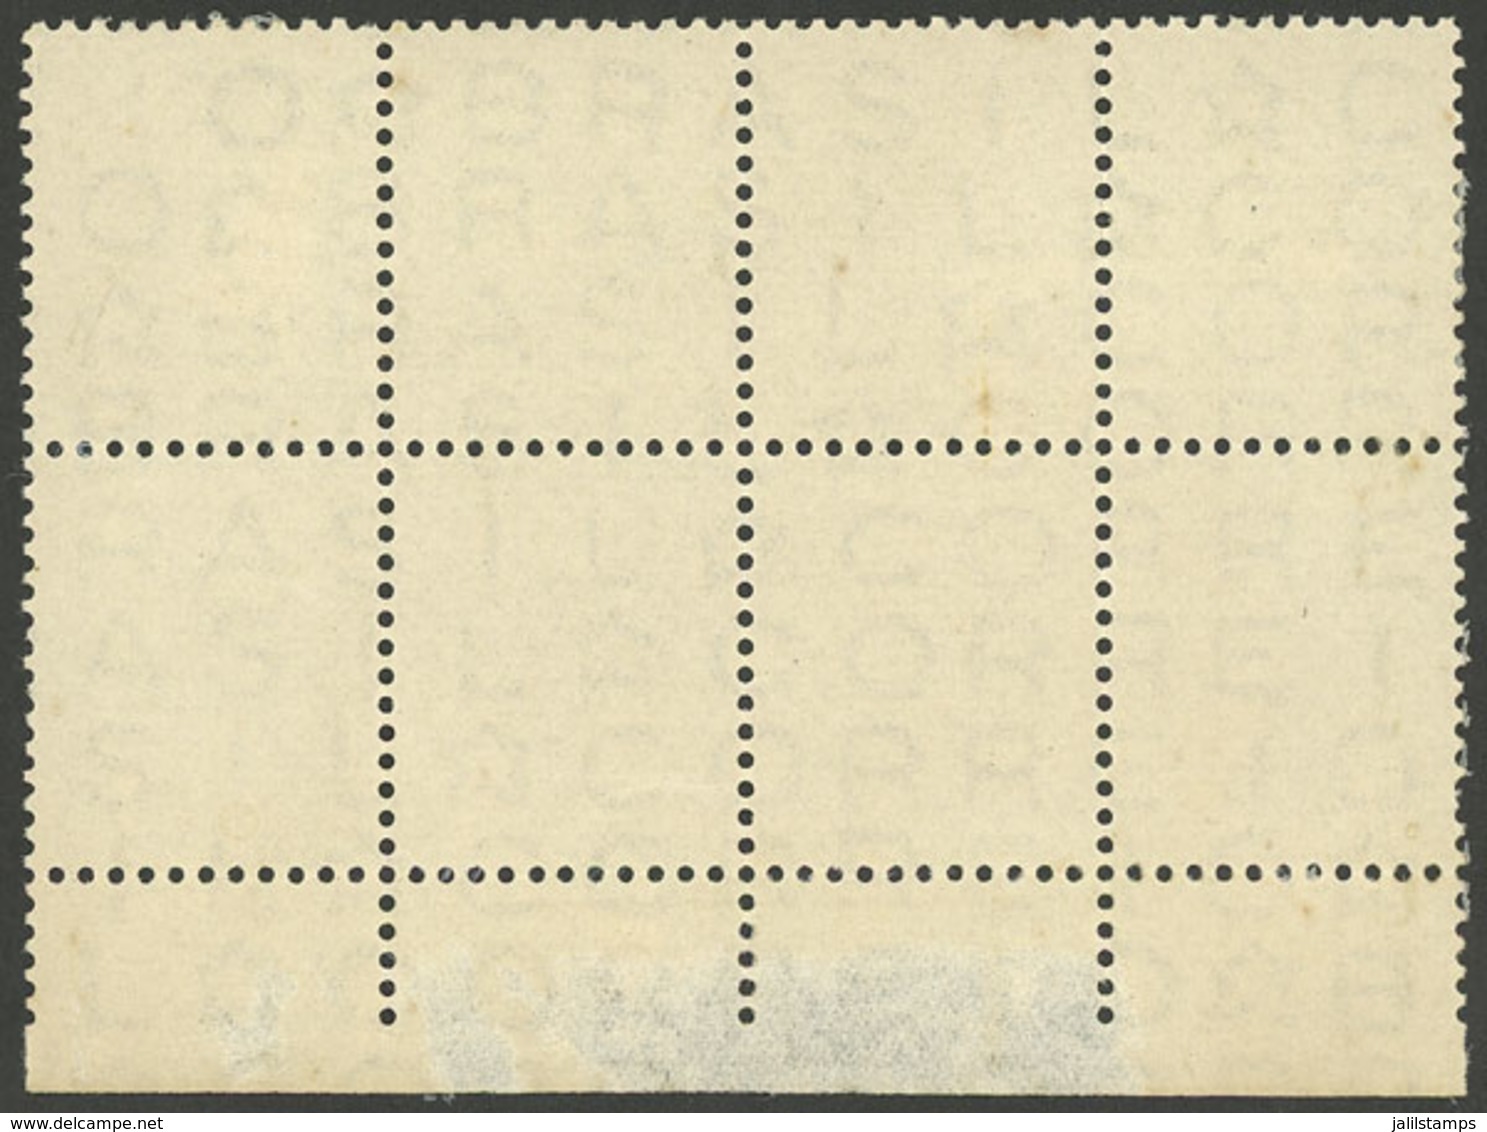 BRAZIL: Circa 1940, Block Of 8 Unprinted Stamps, On Gummed Paper With Watermark, Perforation Proof? - Lettres & Documents